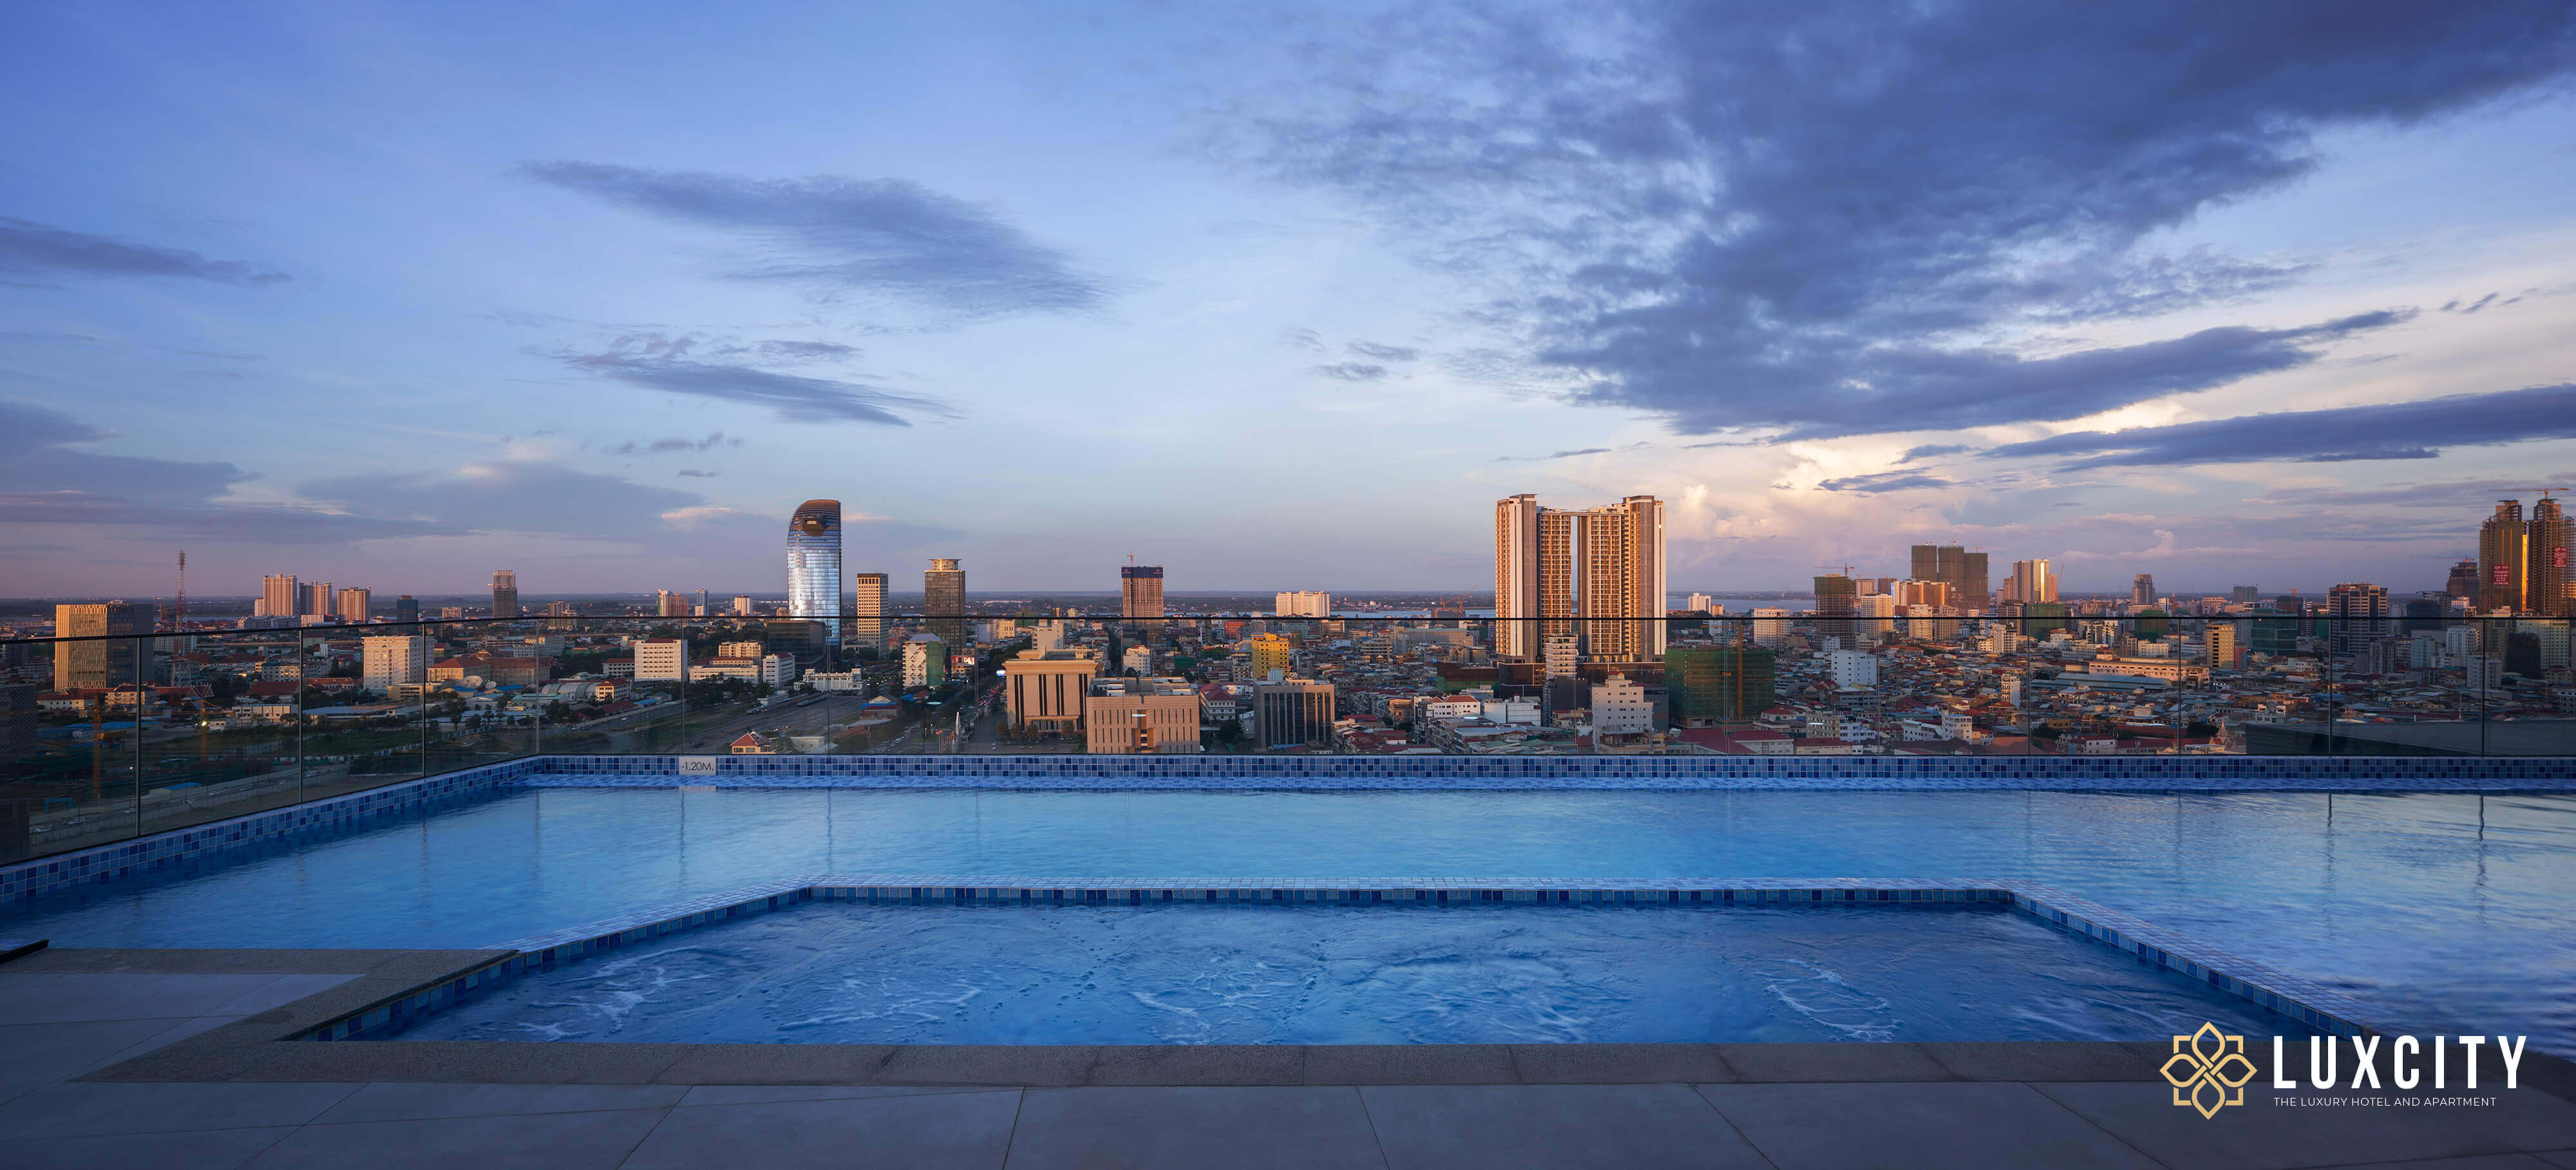 Luxcity Hotel & Apartment has a very nice swimming pool, cool space, nice view for customers